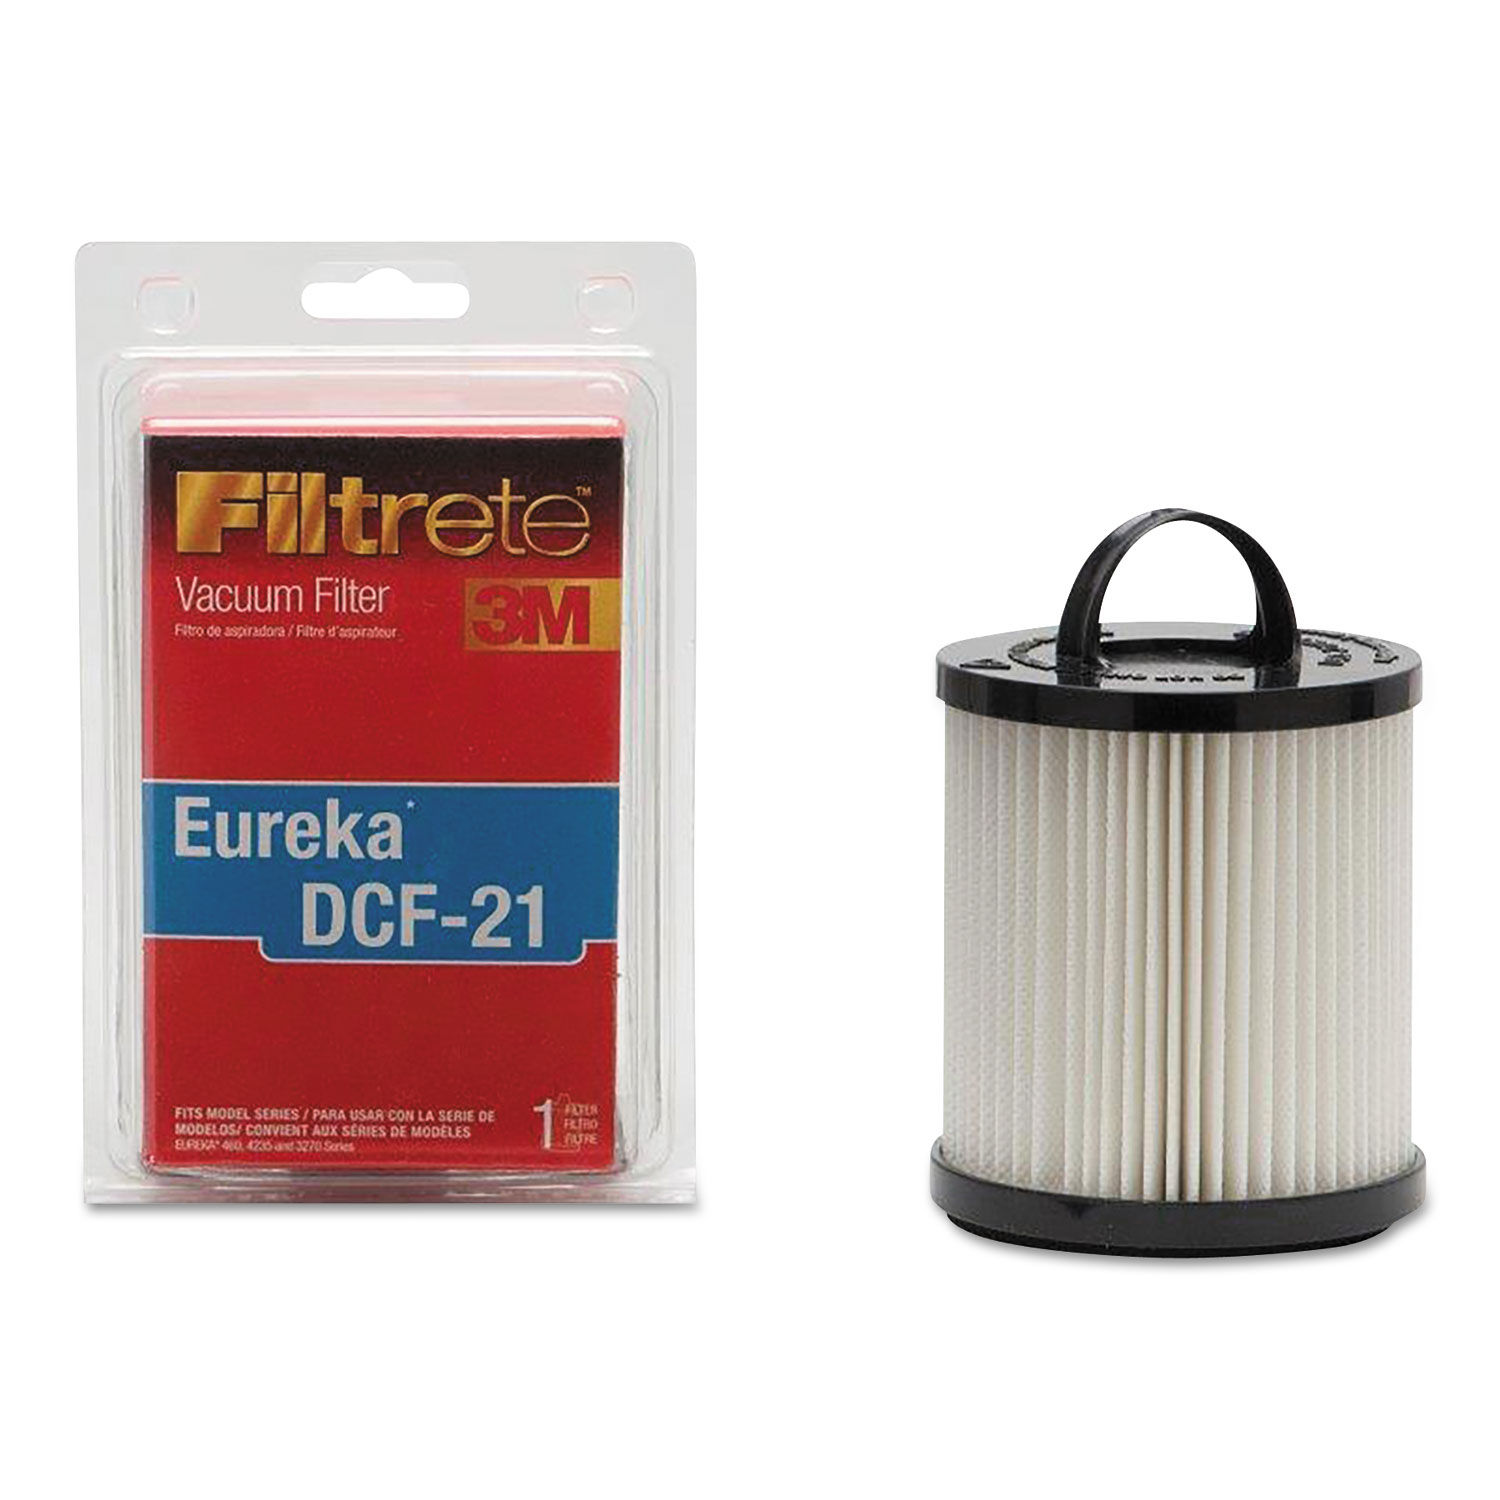 Dcf-21 Dust Cup Filter For Bagless Upright Vacuum Cleaners 2/carton